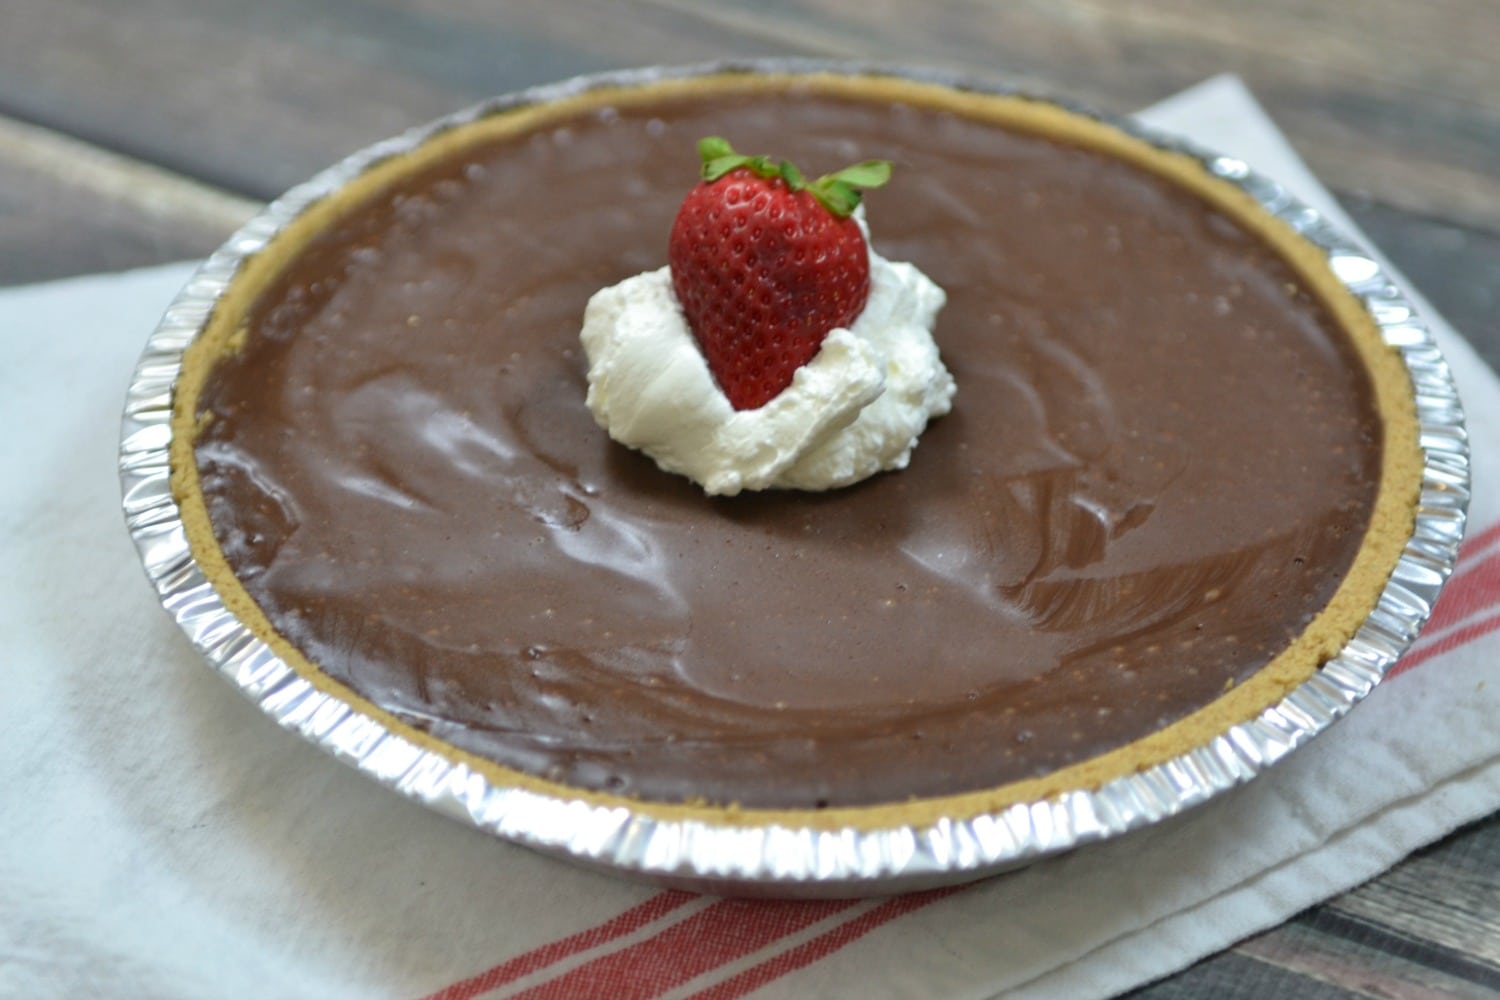 You can garnish your simple chocolate tart with whipped cream and strawberries, yum!